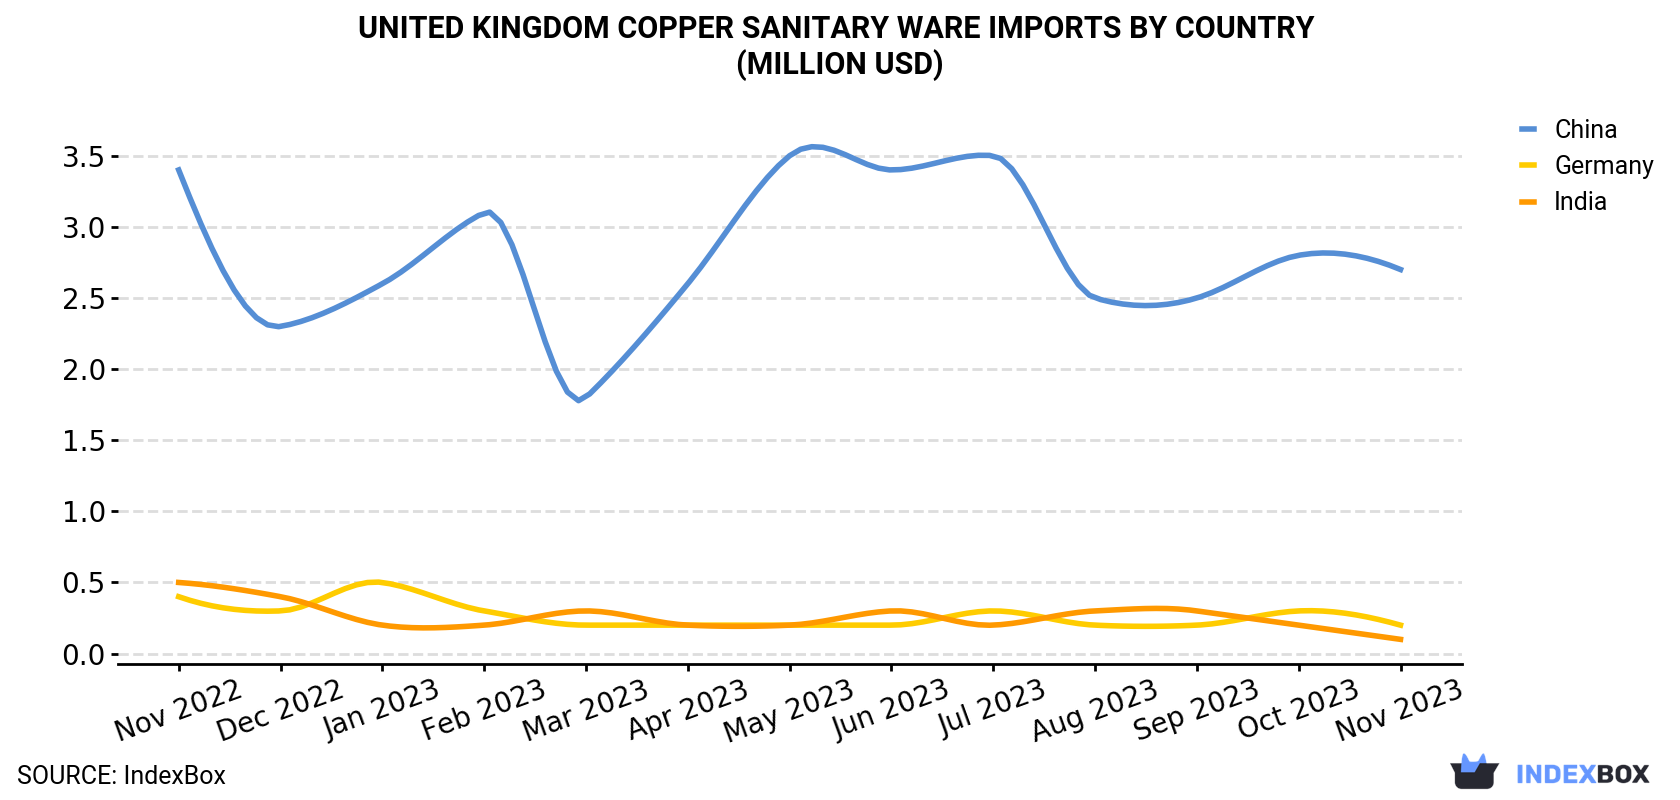 United Kingdom Copper Sanitary Ware Imports By Country (Million USD)